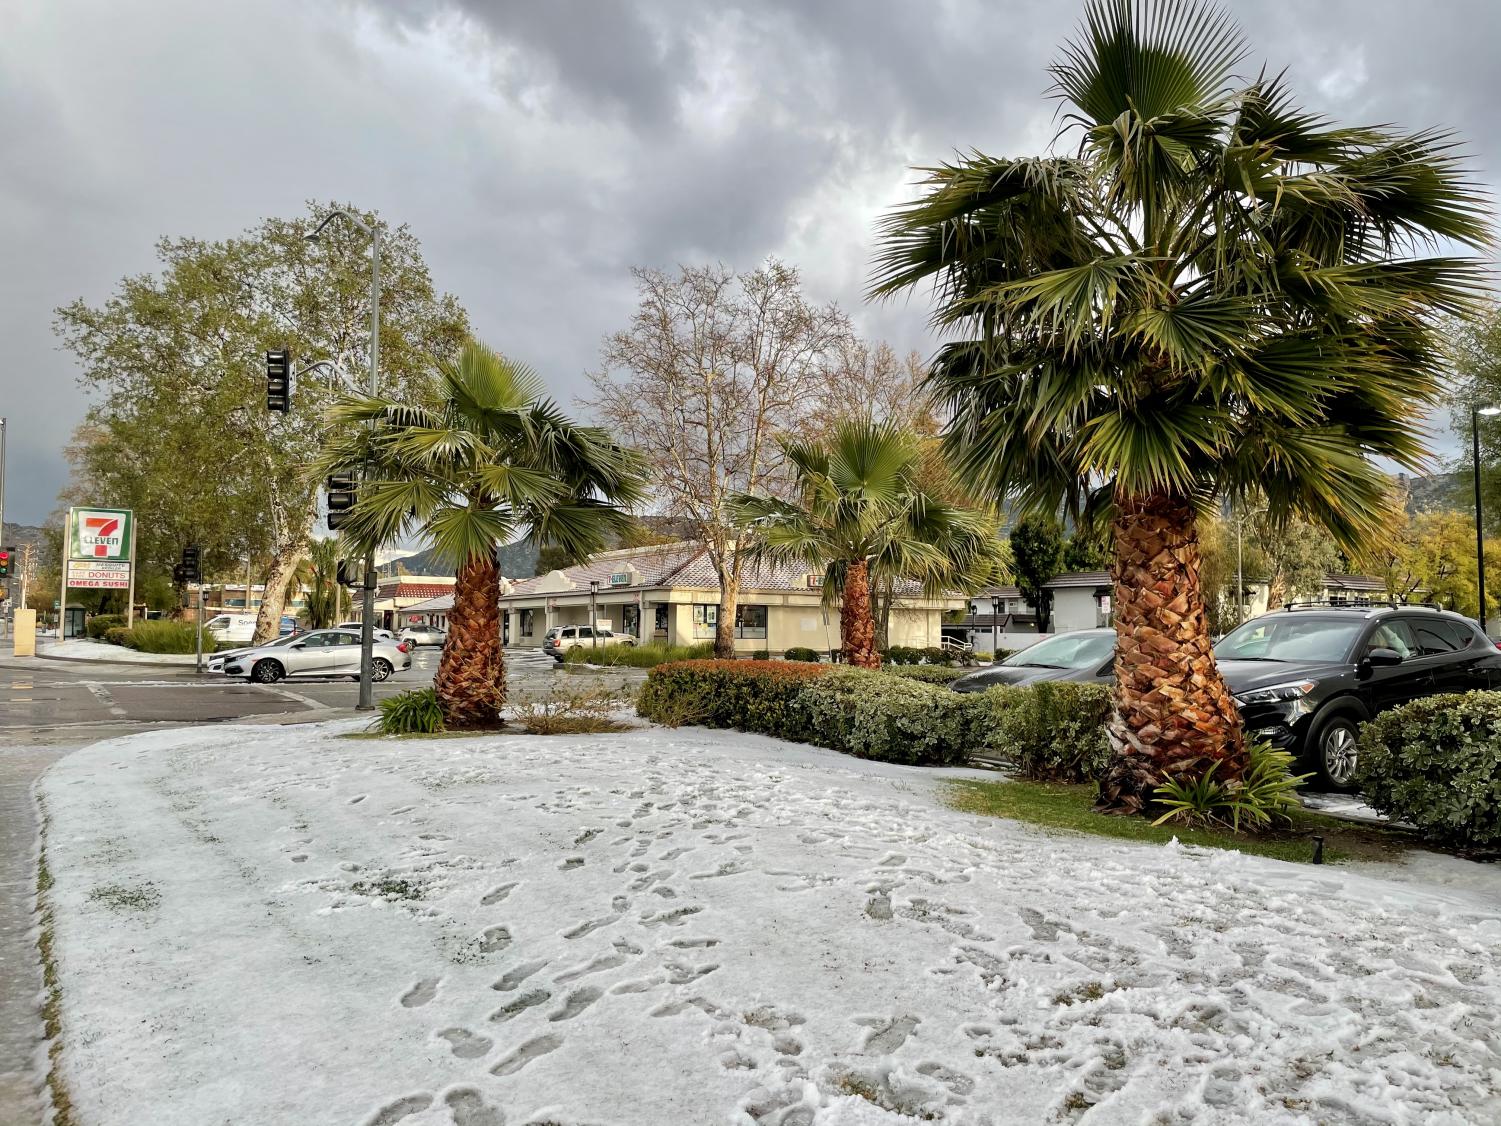 Snow fall on March 11, 2021 at the corner of Yosemite Ave and Los Angeles Ave in Simi Valley, CA.